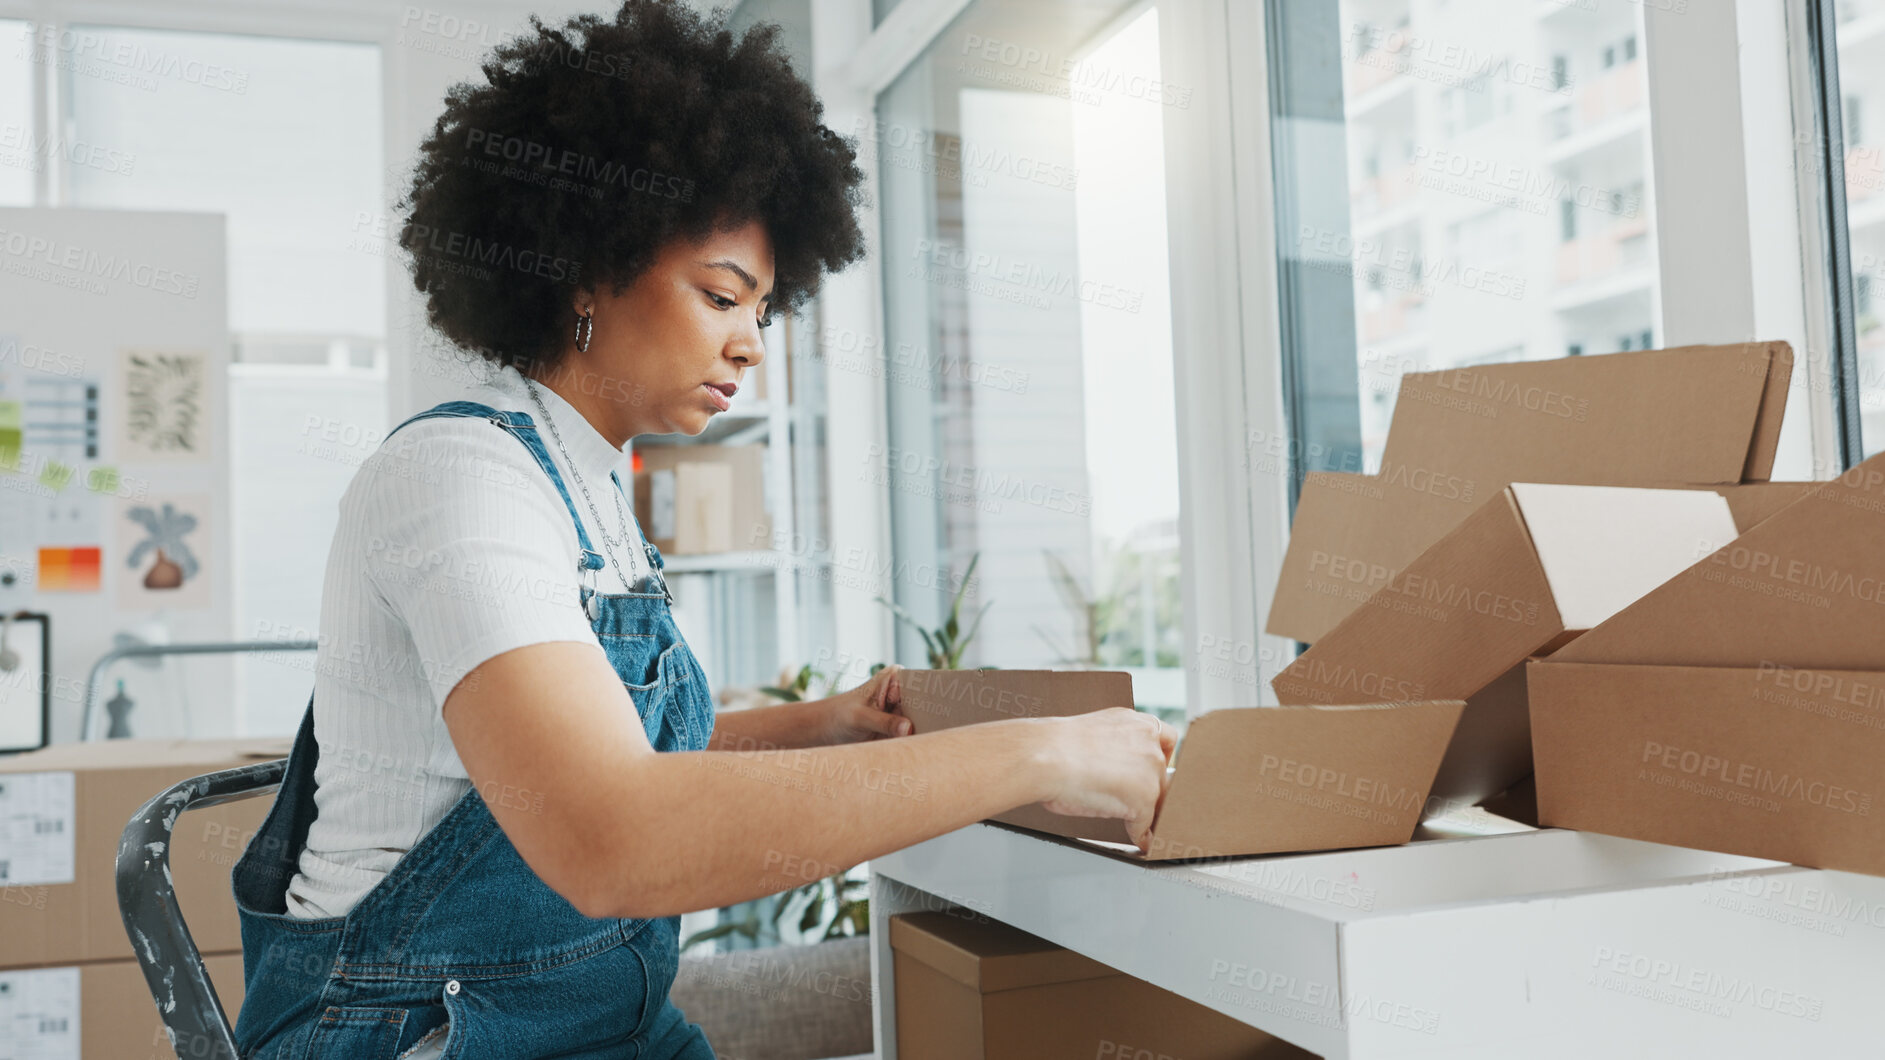 Buy stock photo Ecommerce, woman packing boxes in office for sales and delivery, seller working at creative startup. Online shopping, package and small business owner with product, stock or retail store on internet.